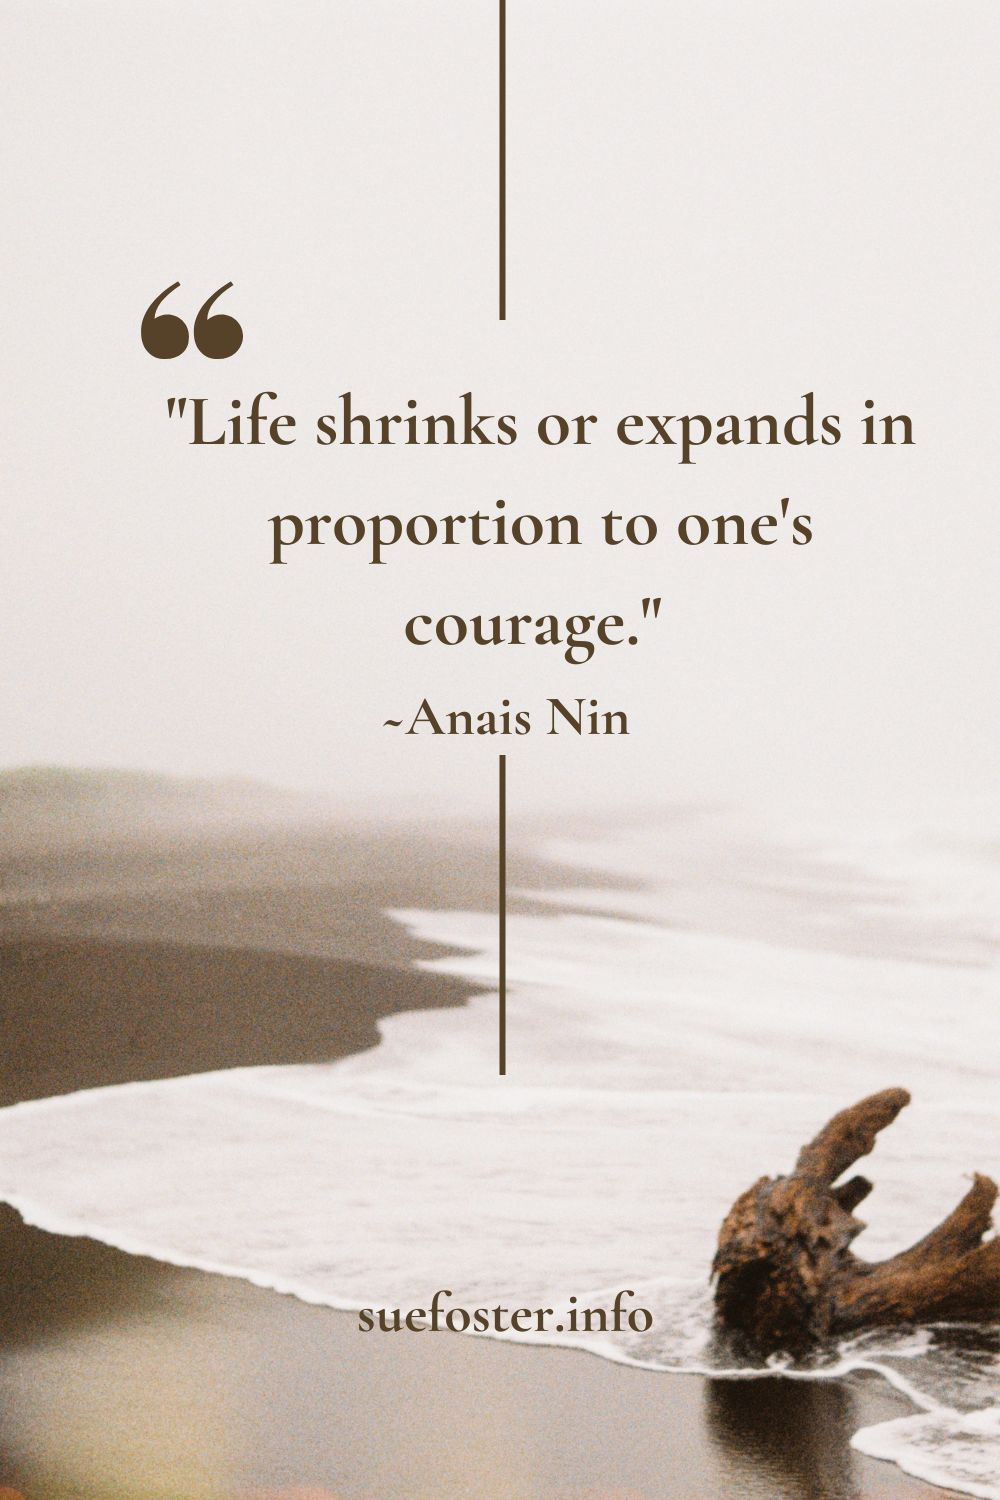 "Life shrinks or expands in proportion to one's courage." ~Anais Nin